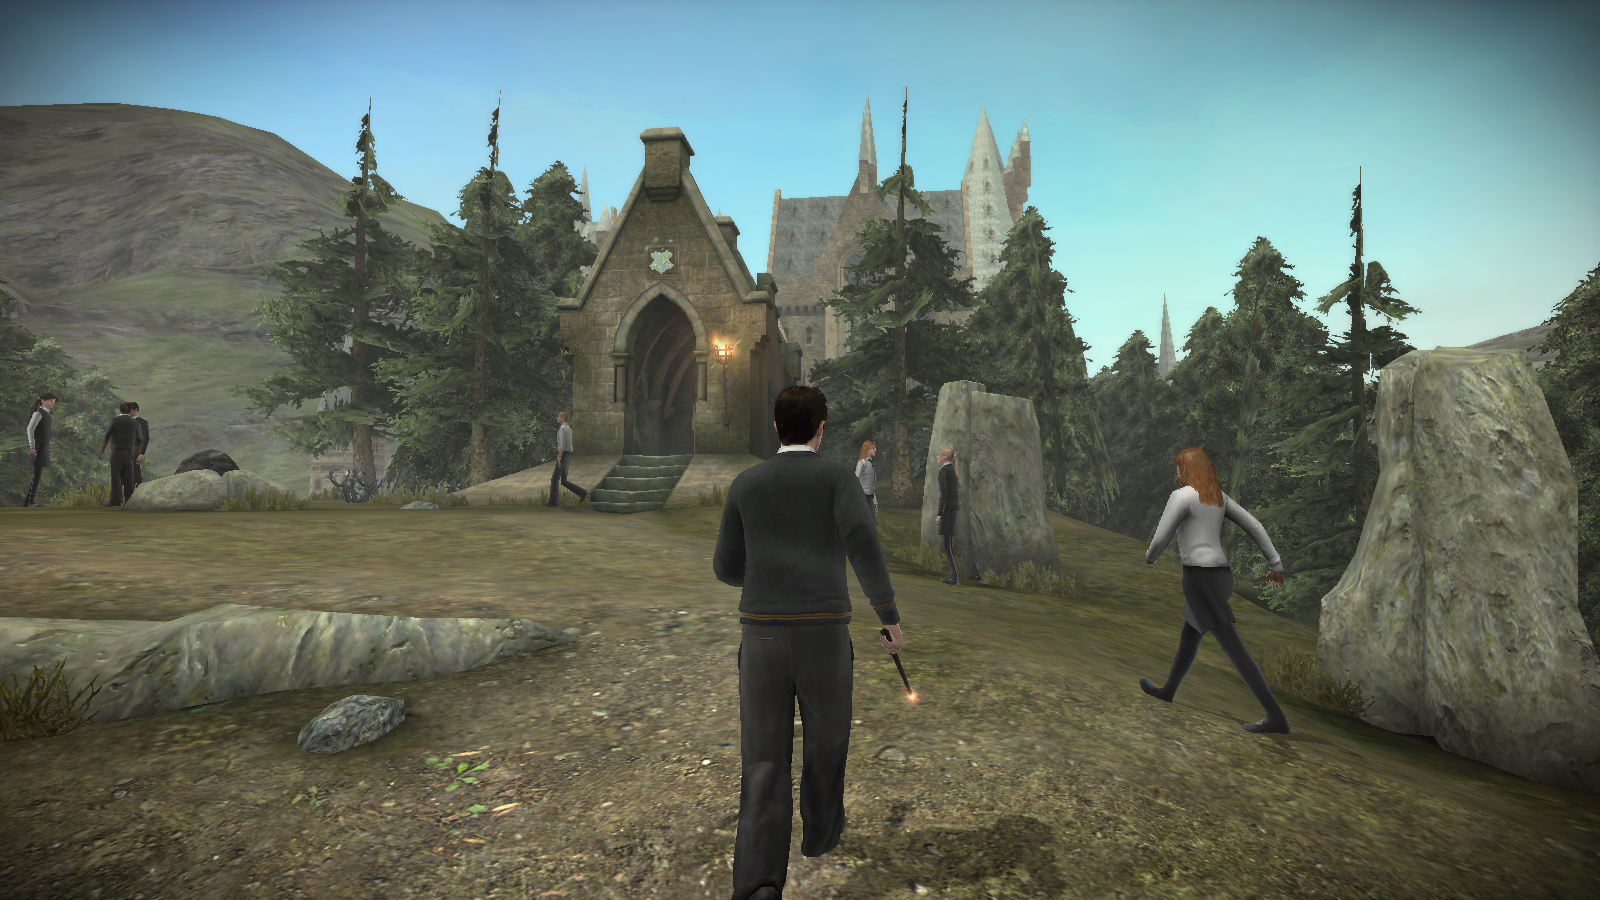 Harry Potter and the Half-Blood Prince Video Game — Harry Potter